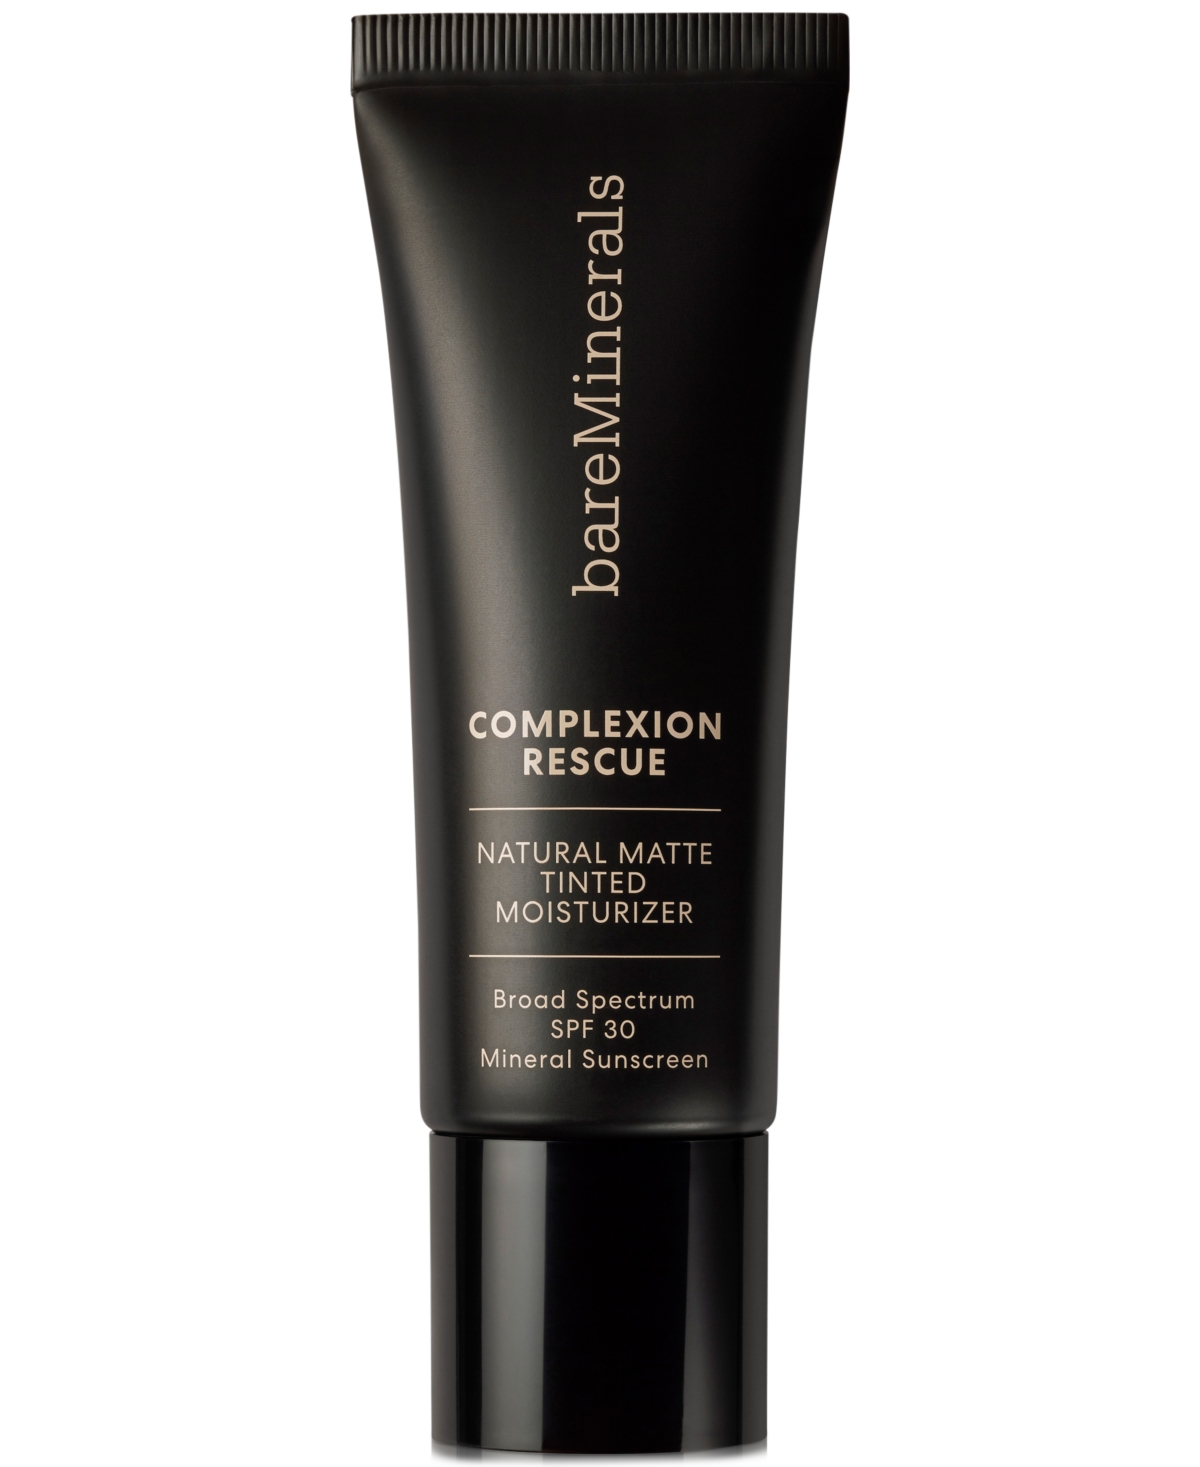 Bareminerals Complexion Rescue Natural Matte Tinted Moisturizer Spf 30 In Bamboo